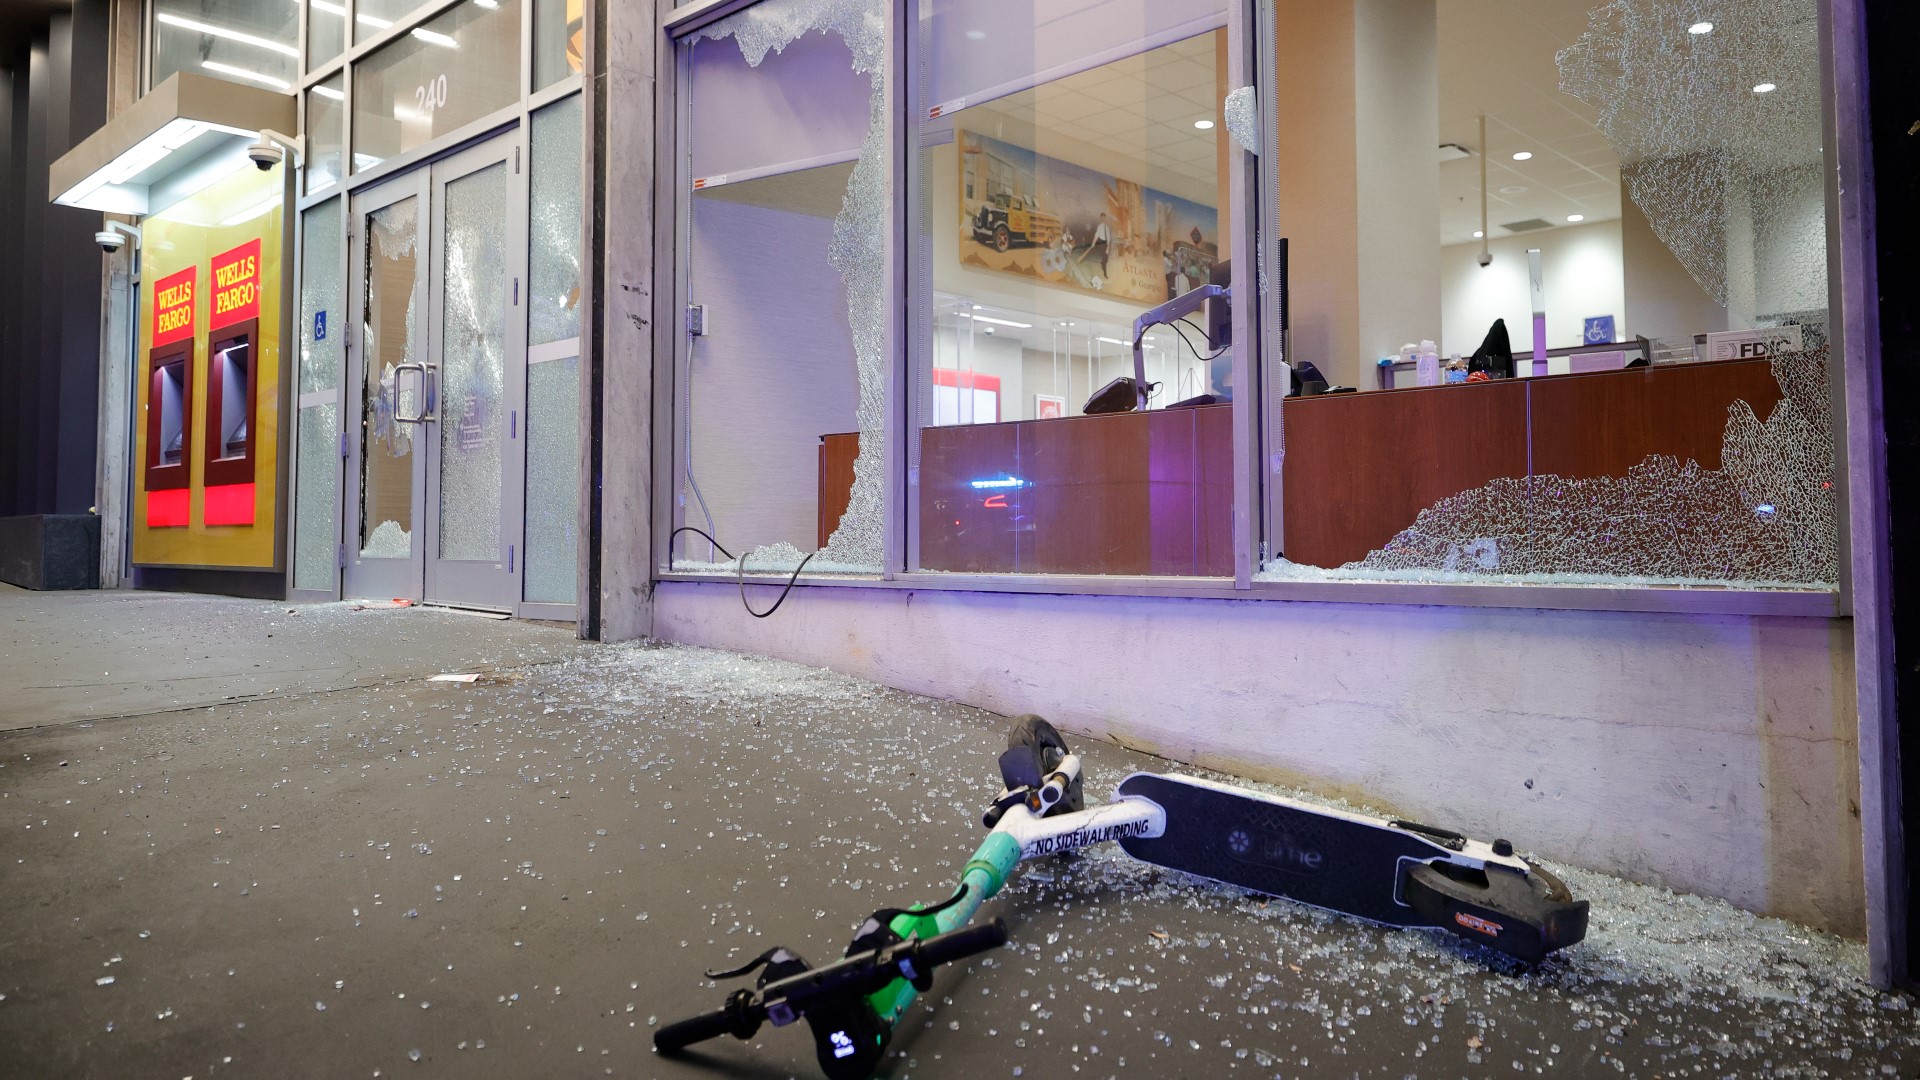 Activists threw rocks and reportedly lit fireworks in front of a building that houses the Atlanta Police Foundation.